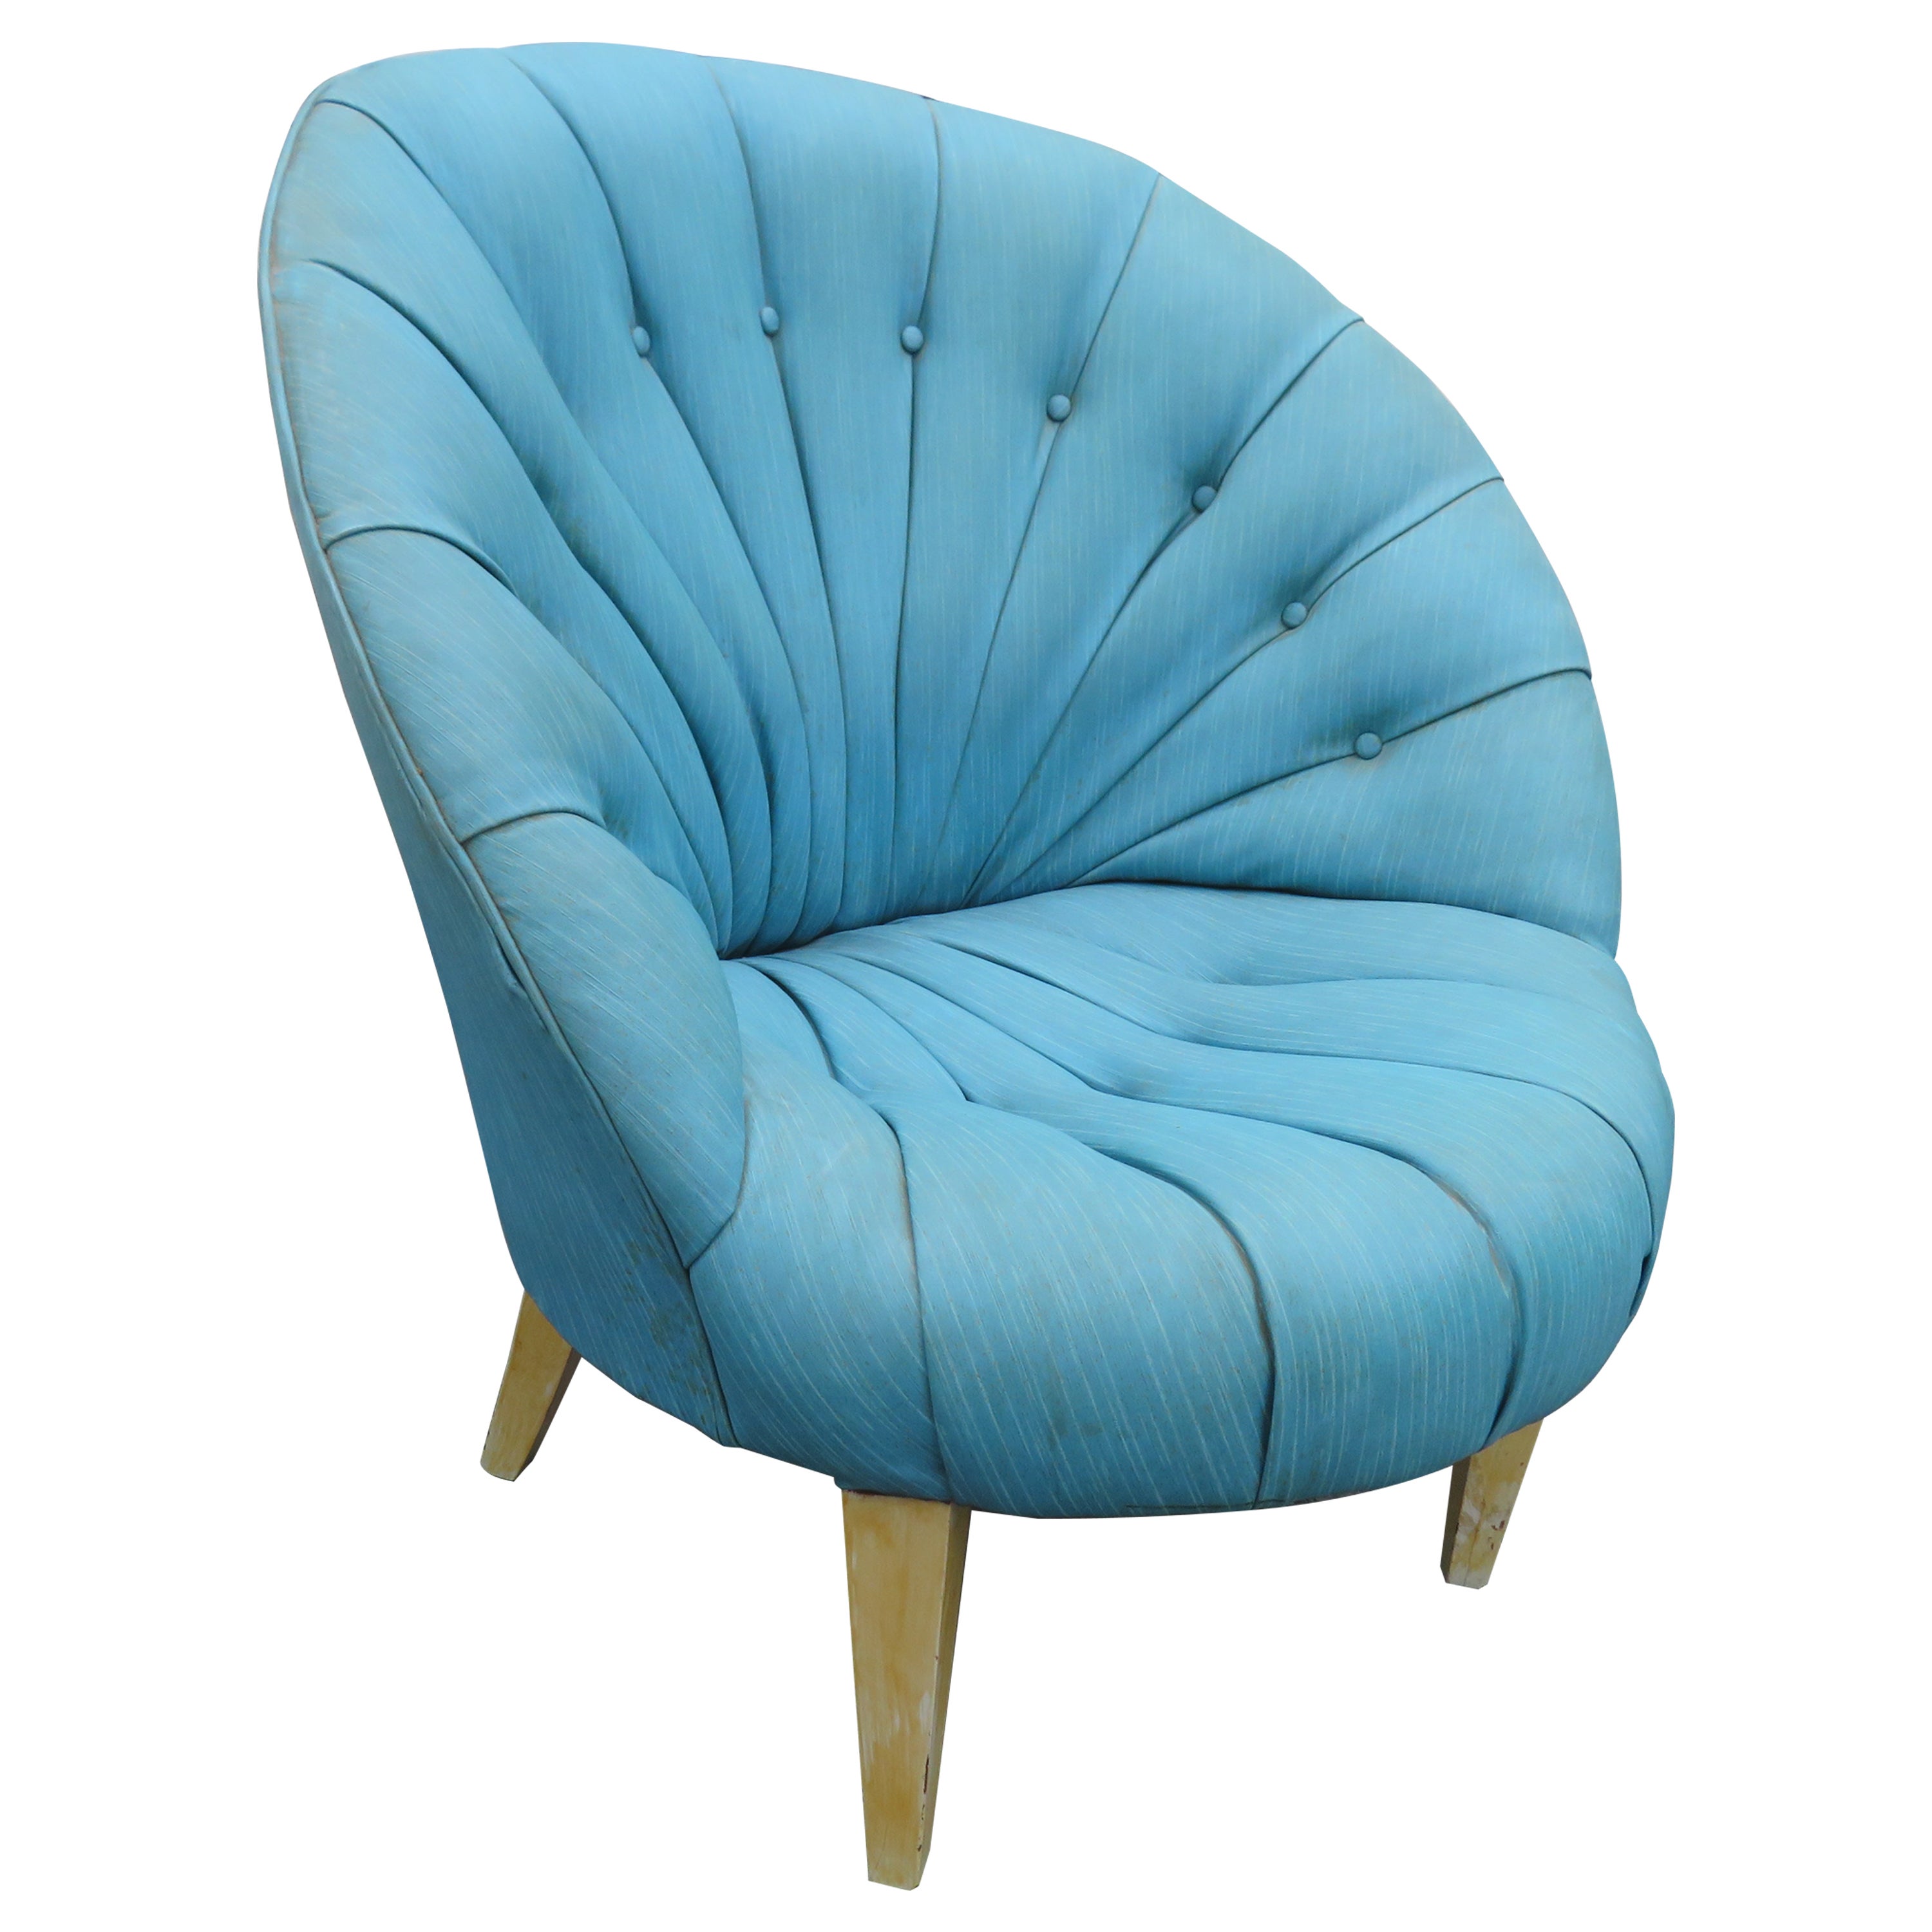 Delightful Dorothy Draper Style Channel Tufted Circular Chair Hollywood Regency For Sale